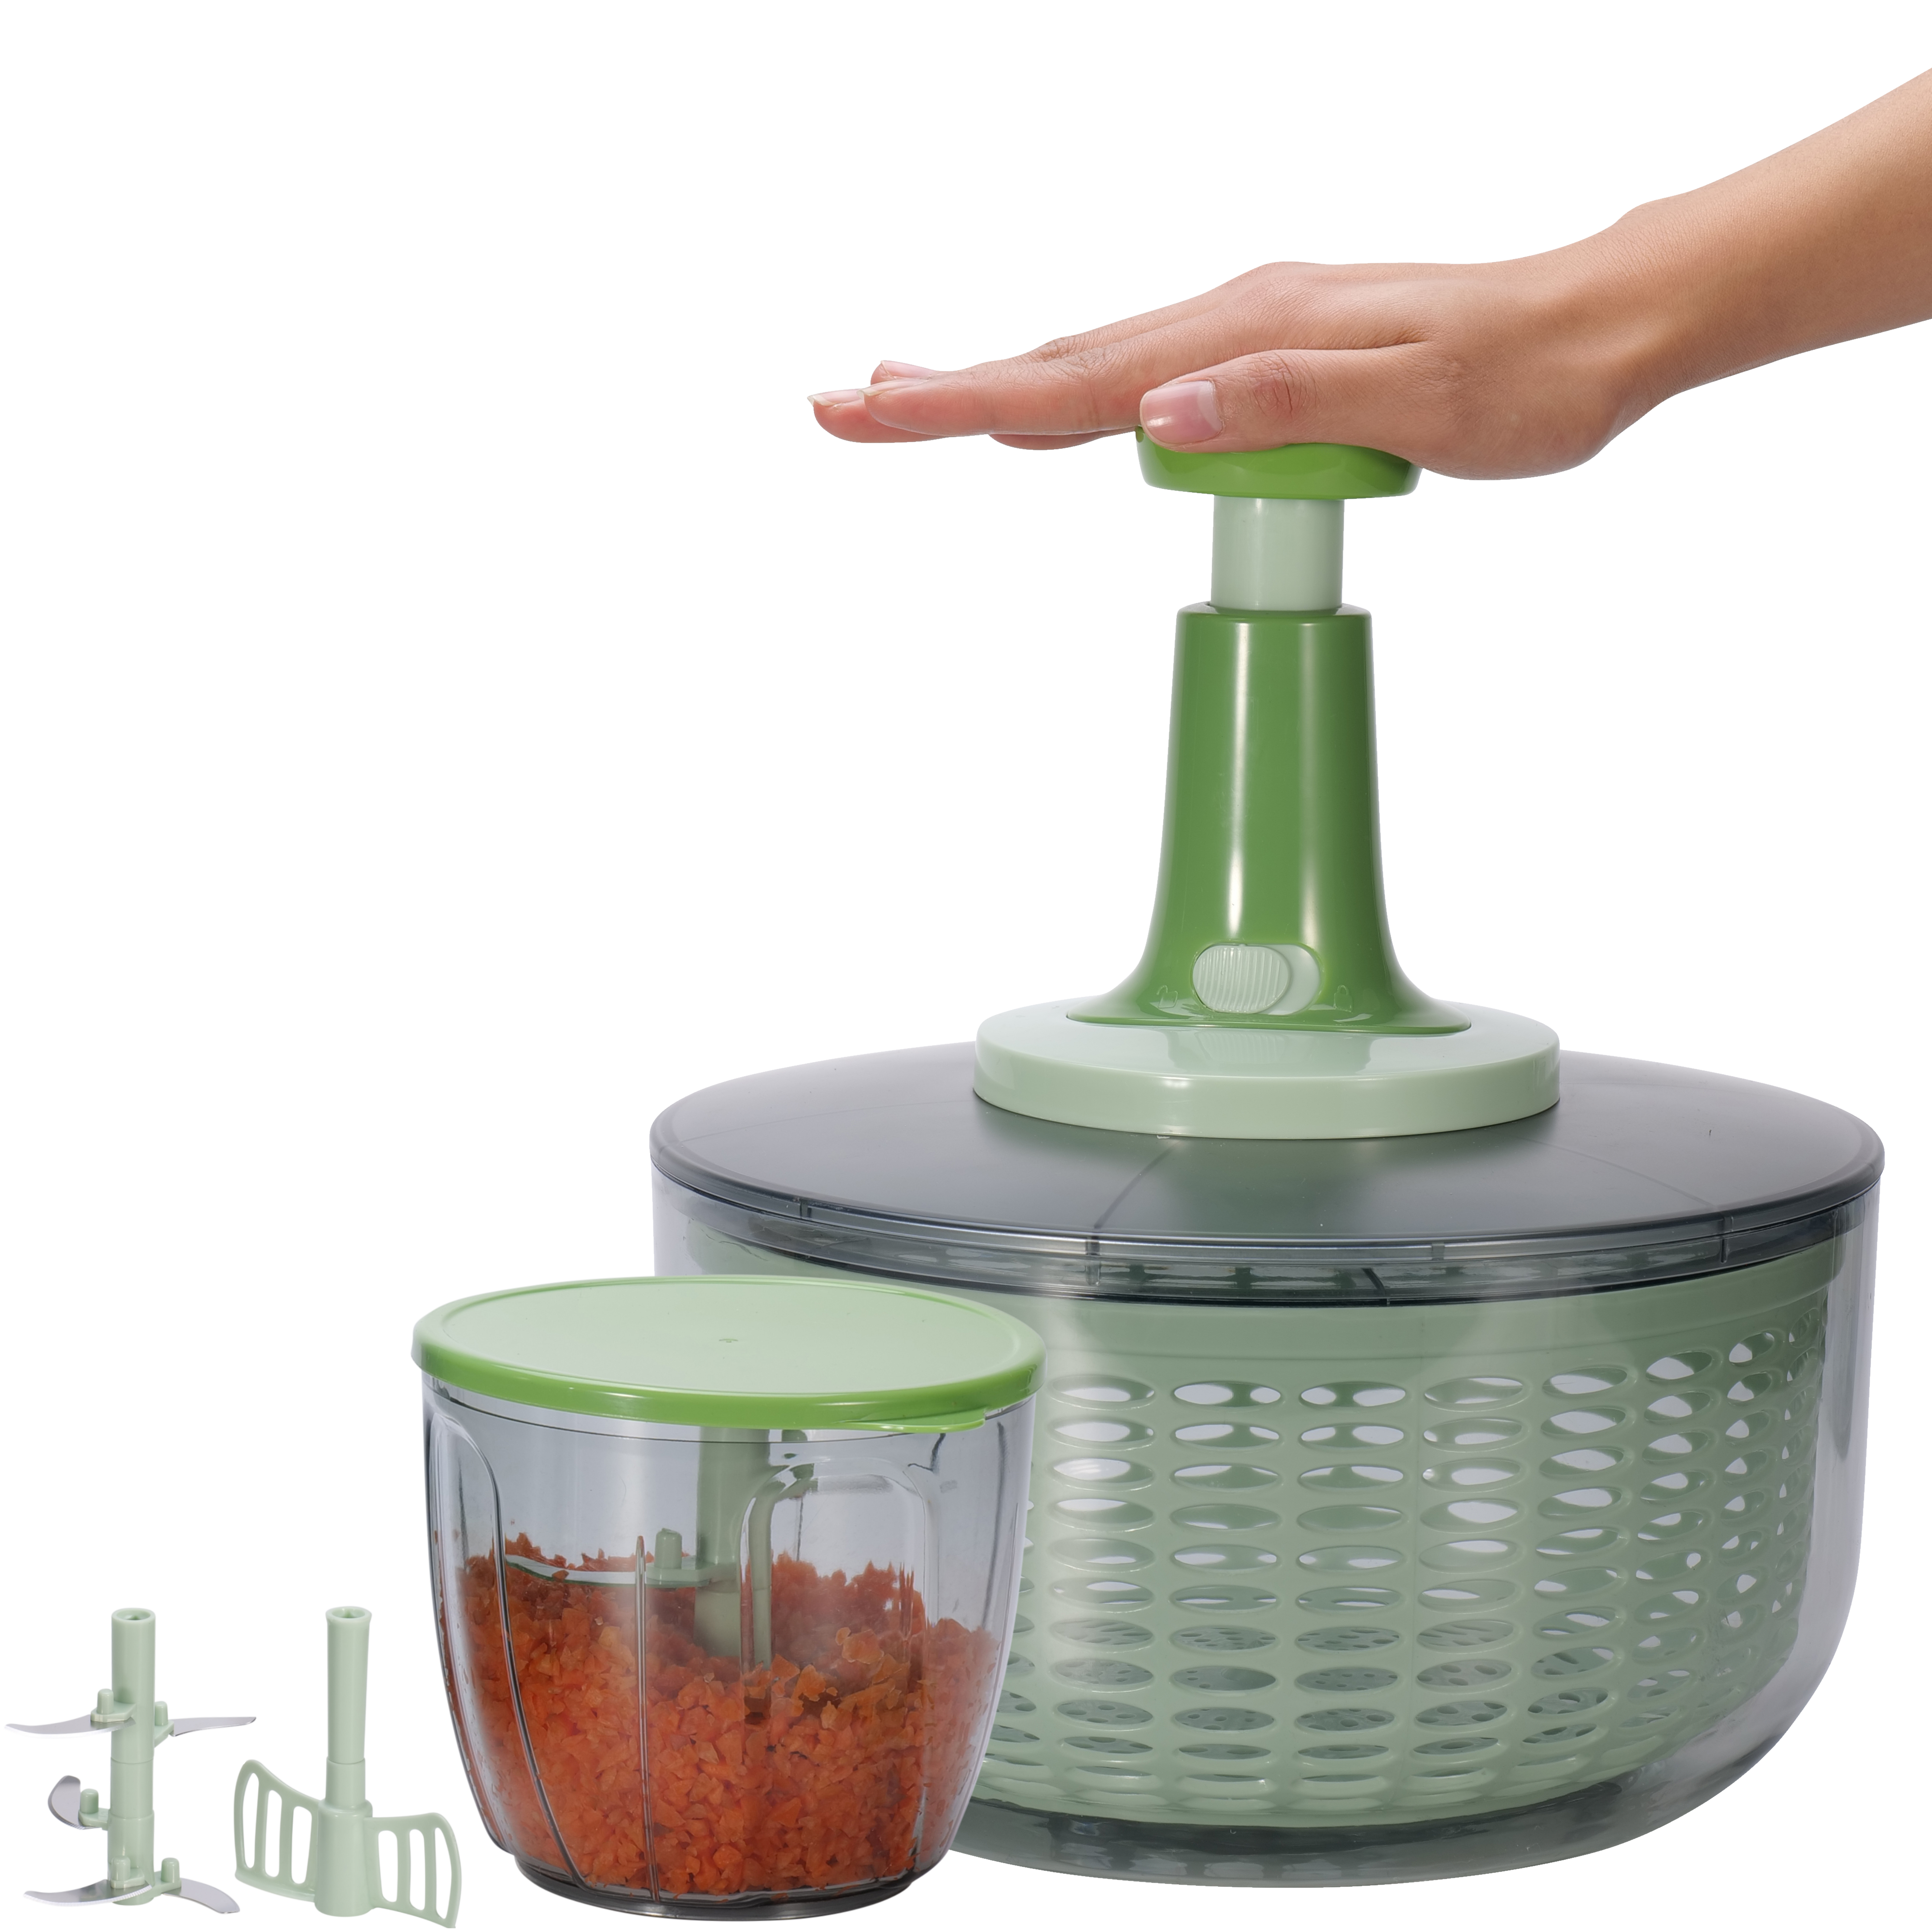 Brieftons QuickPull Manual Food Chopper: Large 4-Cup Vietnam